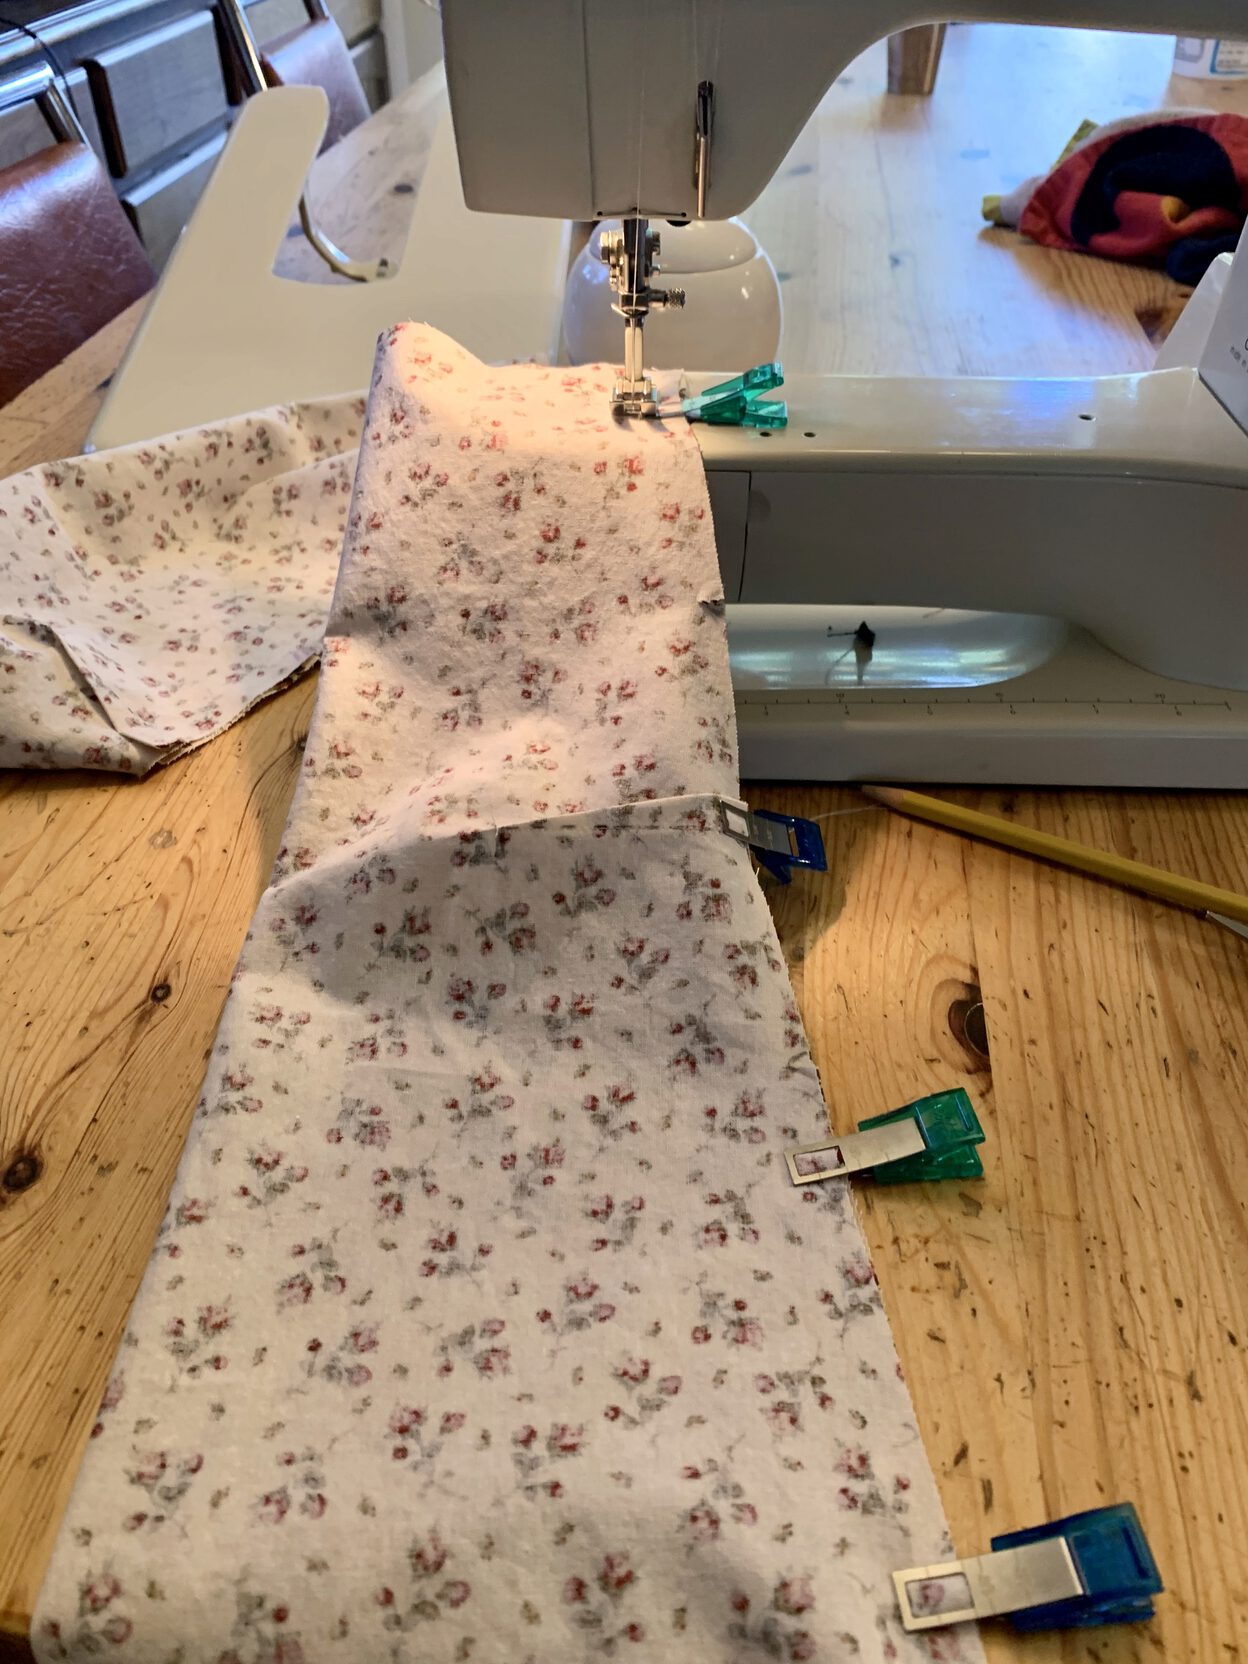 A sleeve ready to sew. I like using these clips where possible.